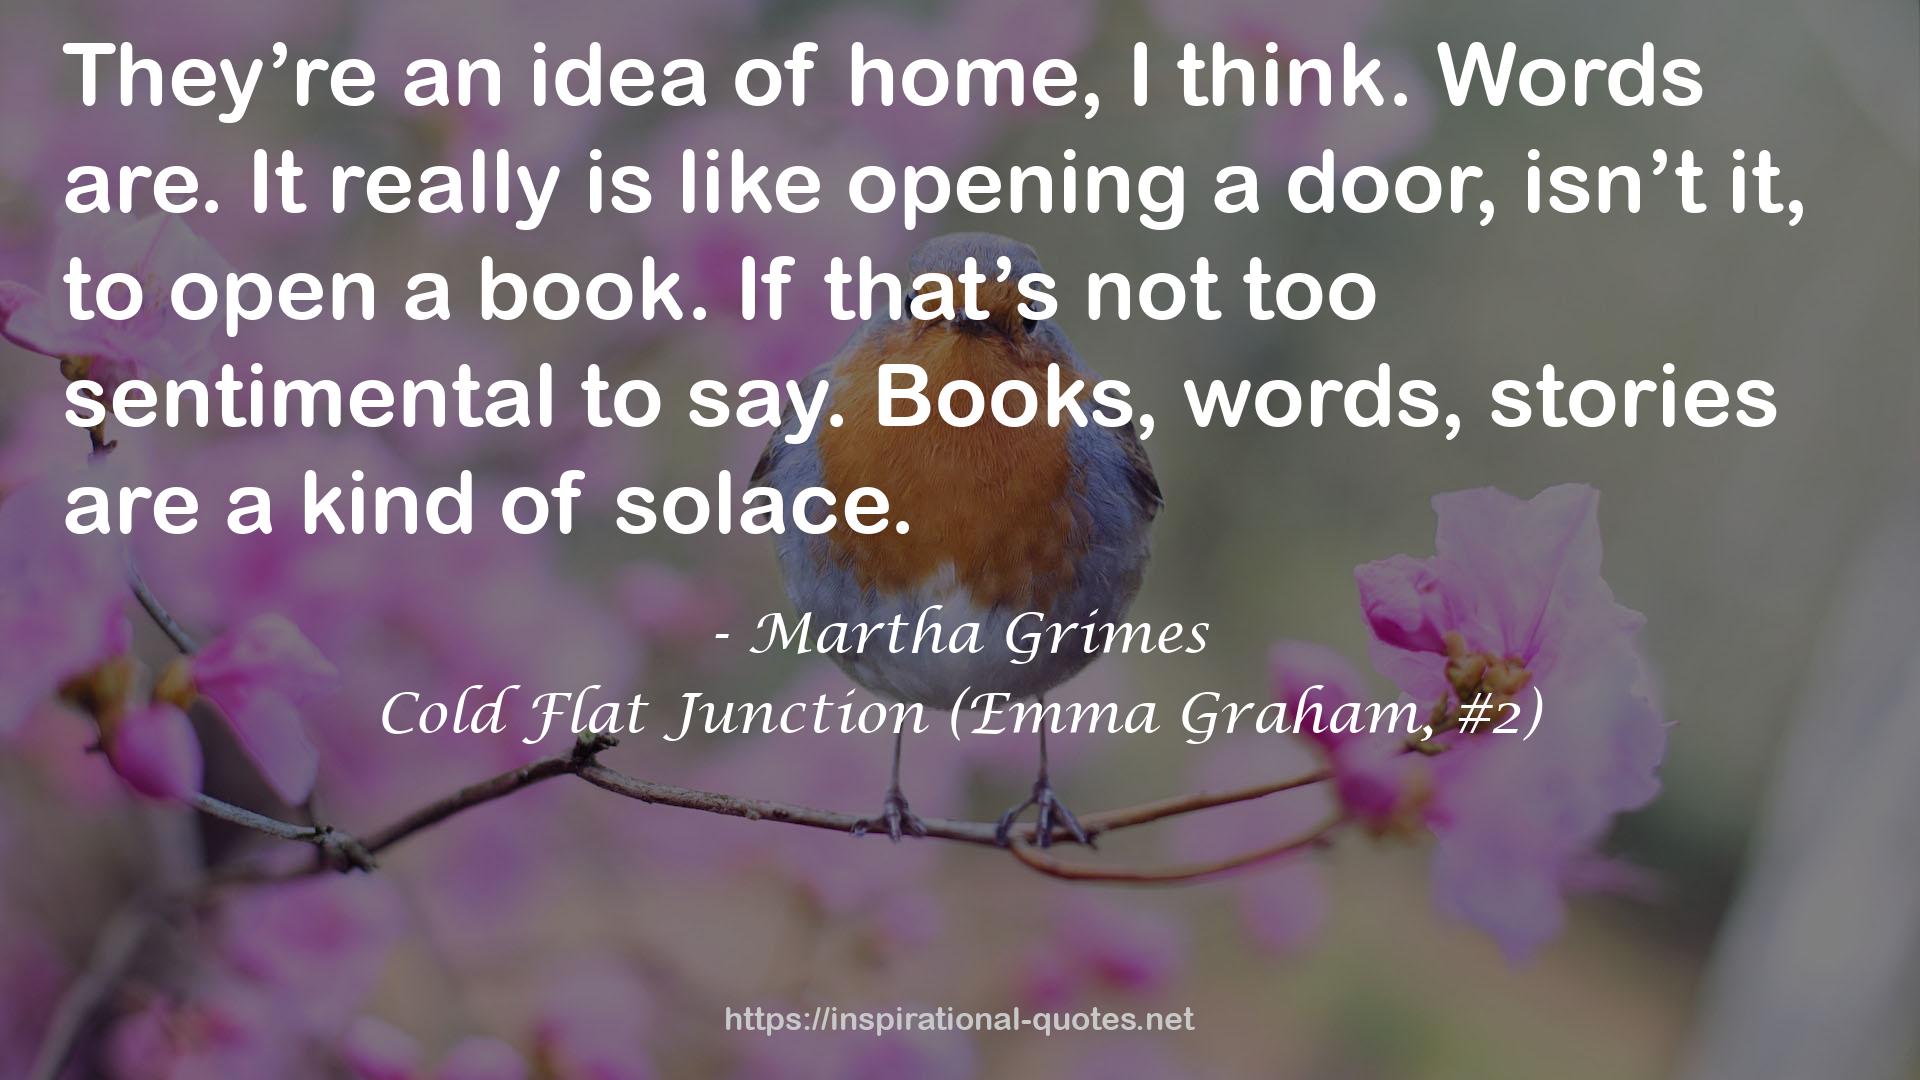 Cold Flat Junction (Emma Graham, #2) QUOTES